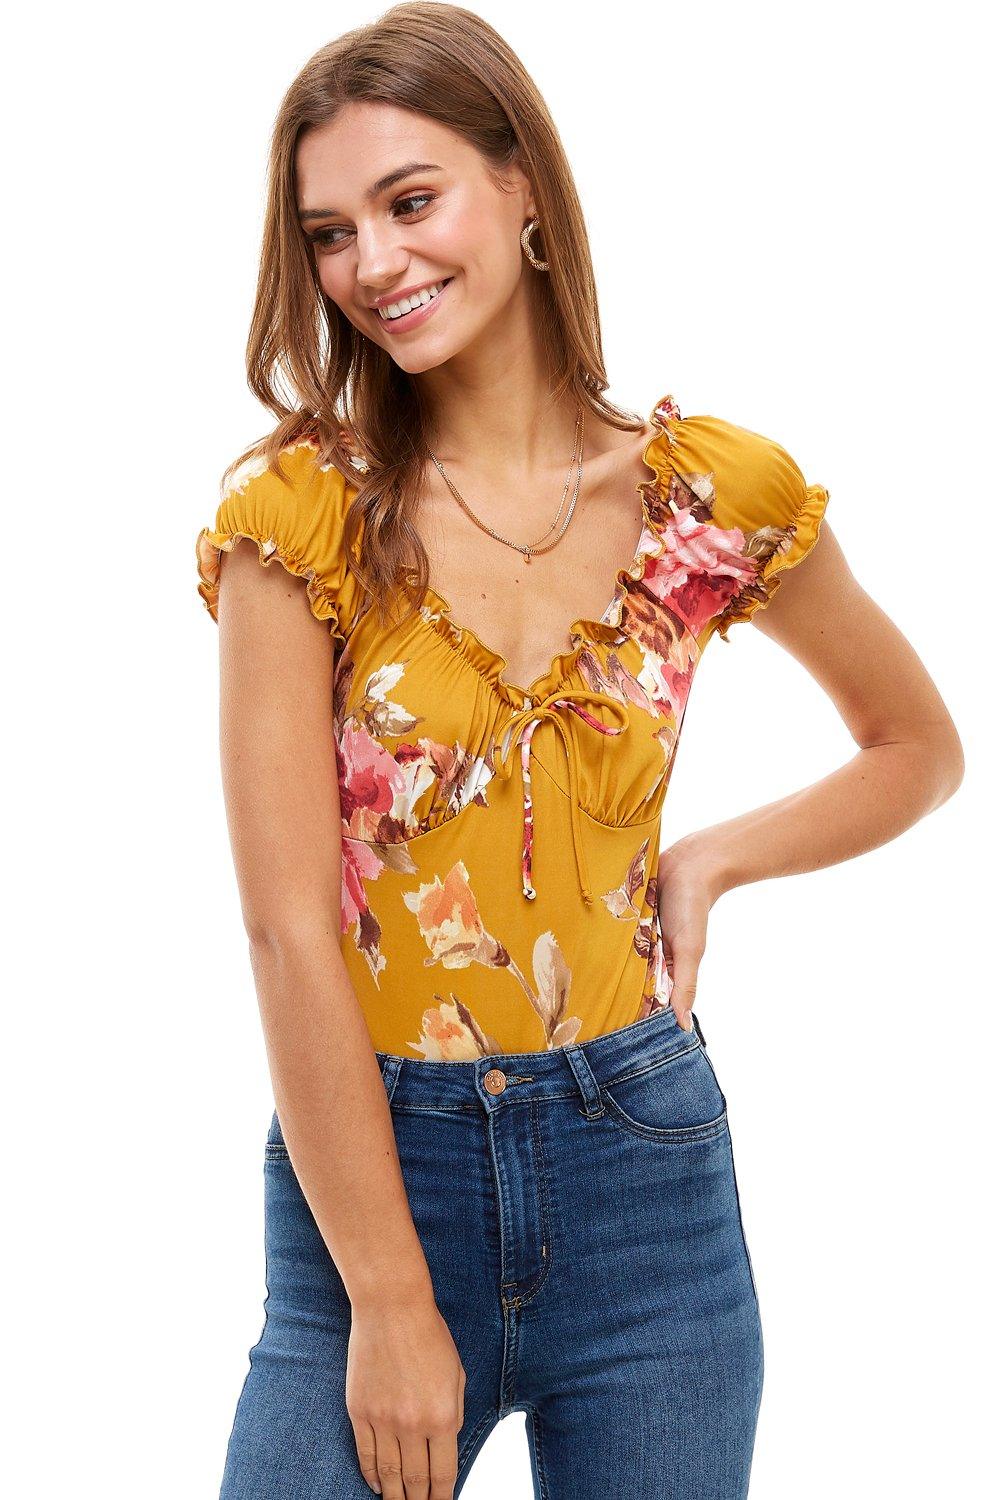 Floral Printed Peasant Style Bodysuit - Brand My Case